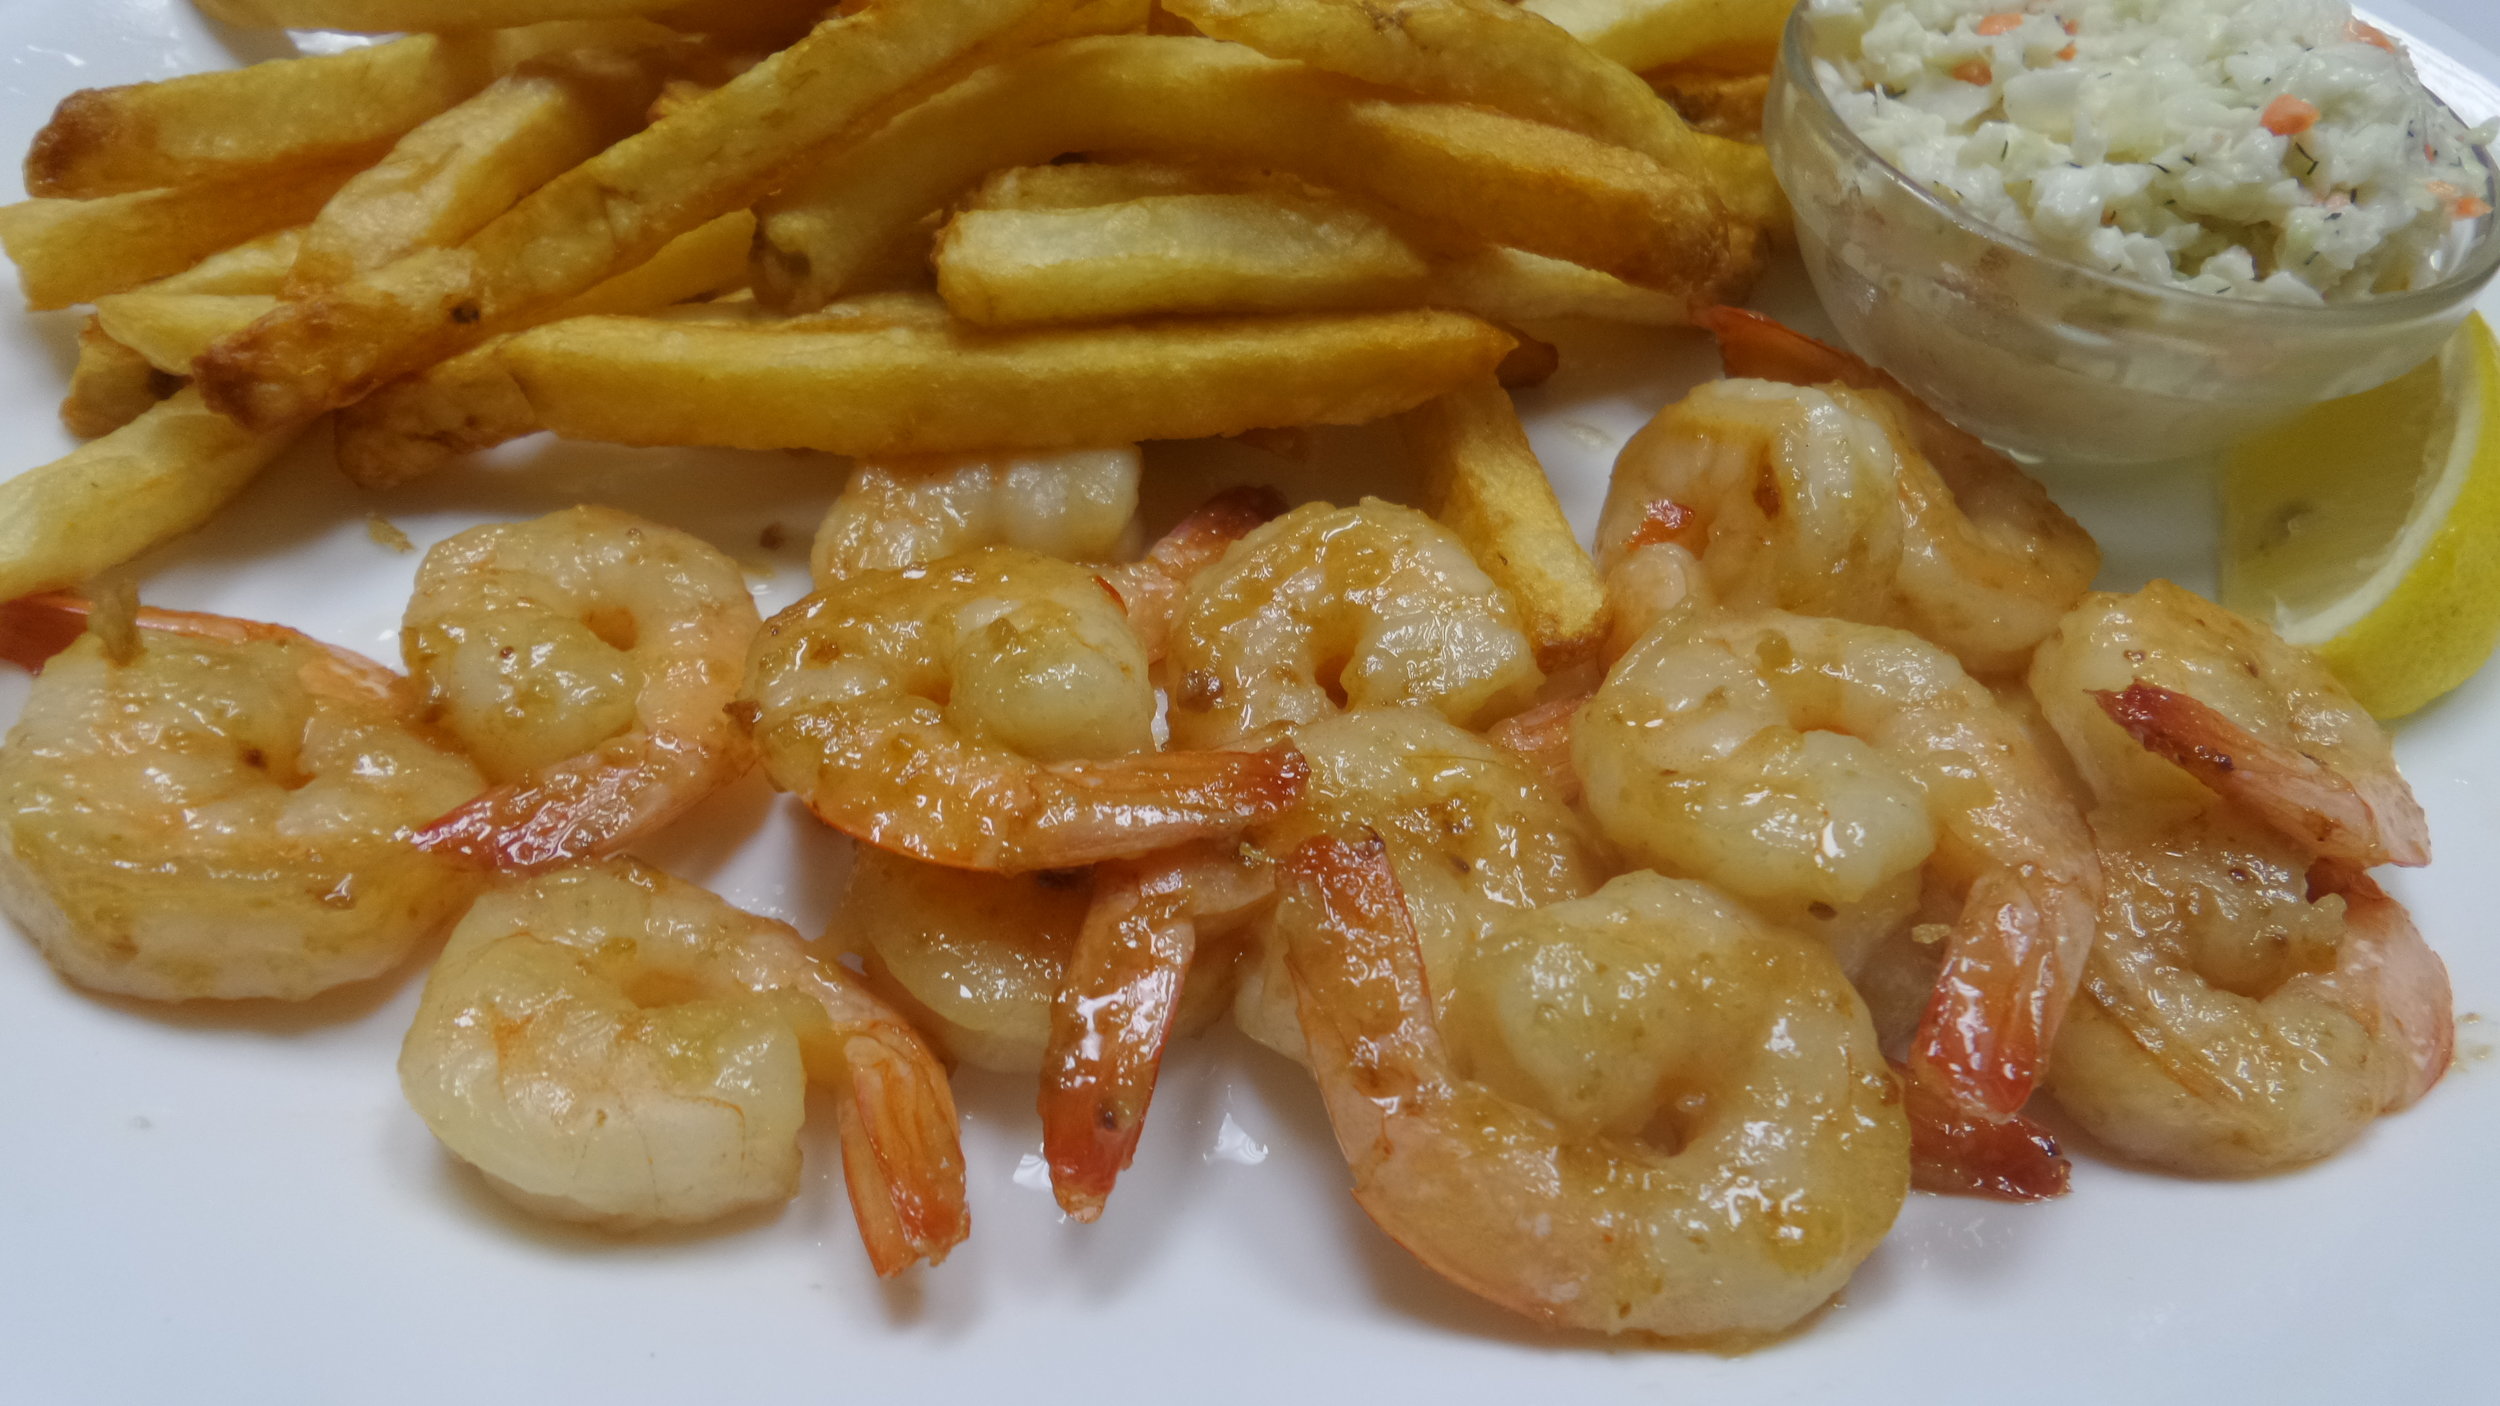 1/2 lb Pan Fried Shrimp and Chips